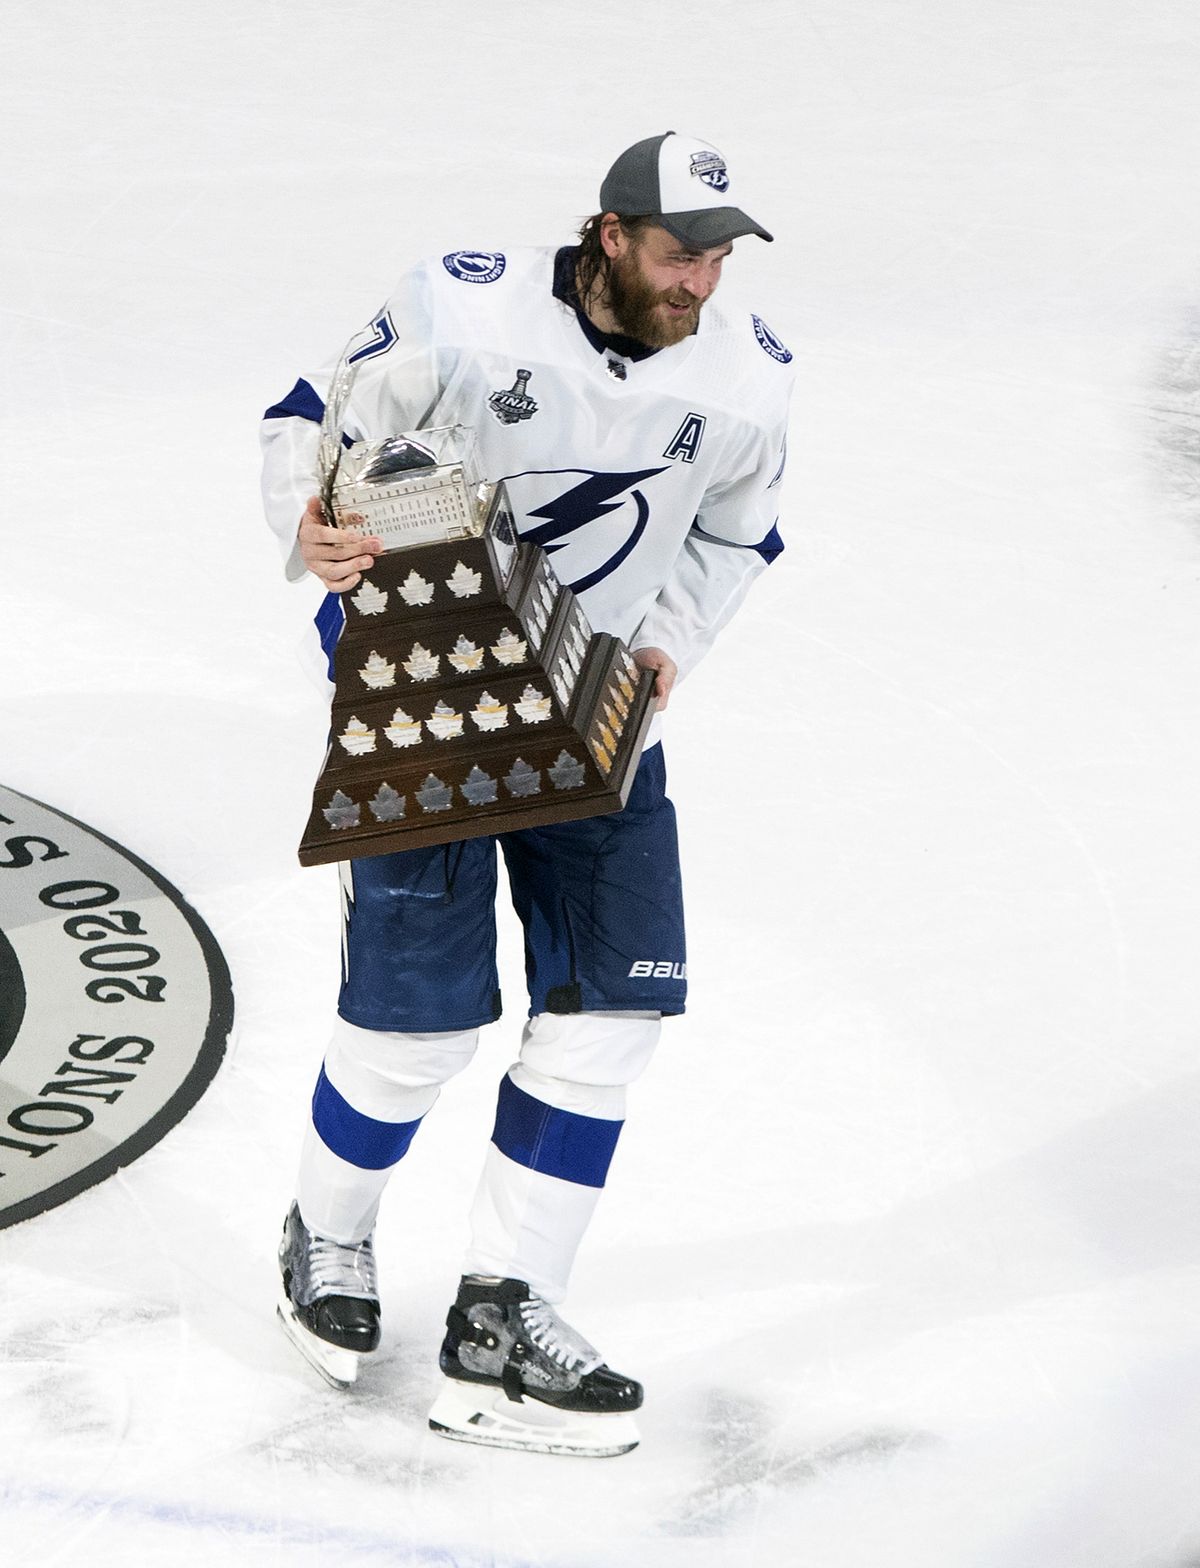 Stanley Cup: Lightning beat Stars in Game 6 to capture NHL crown